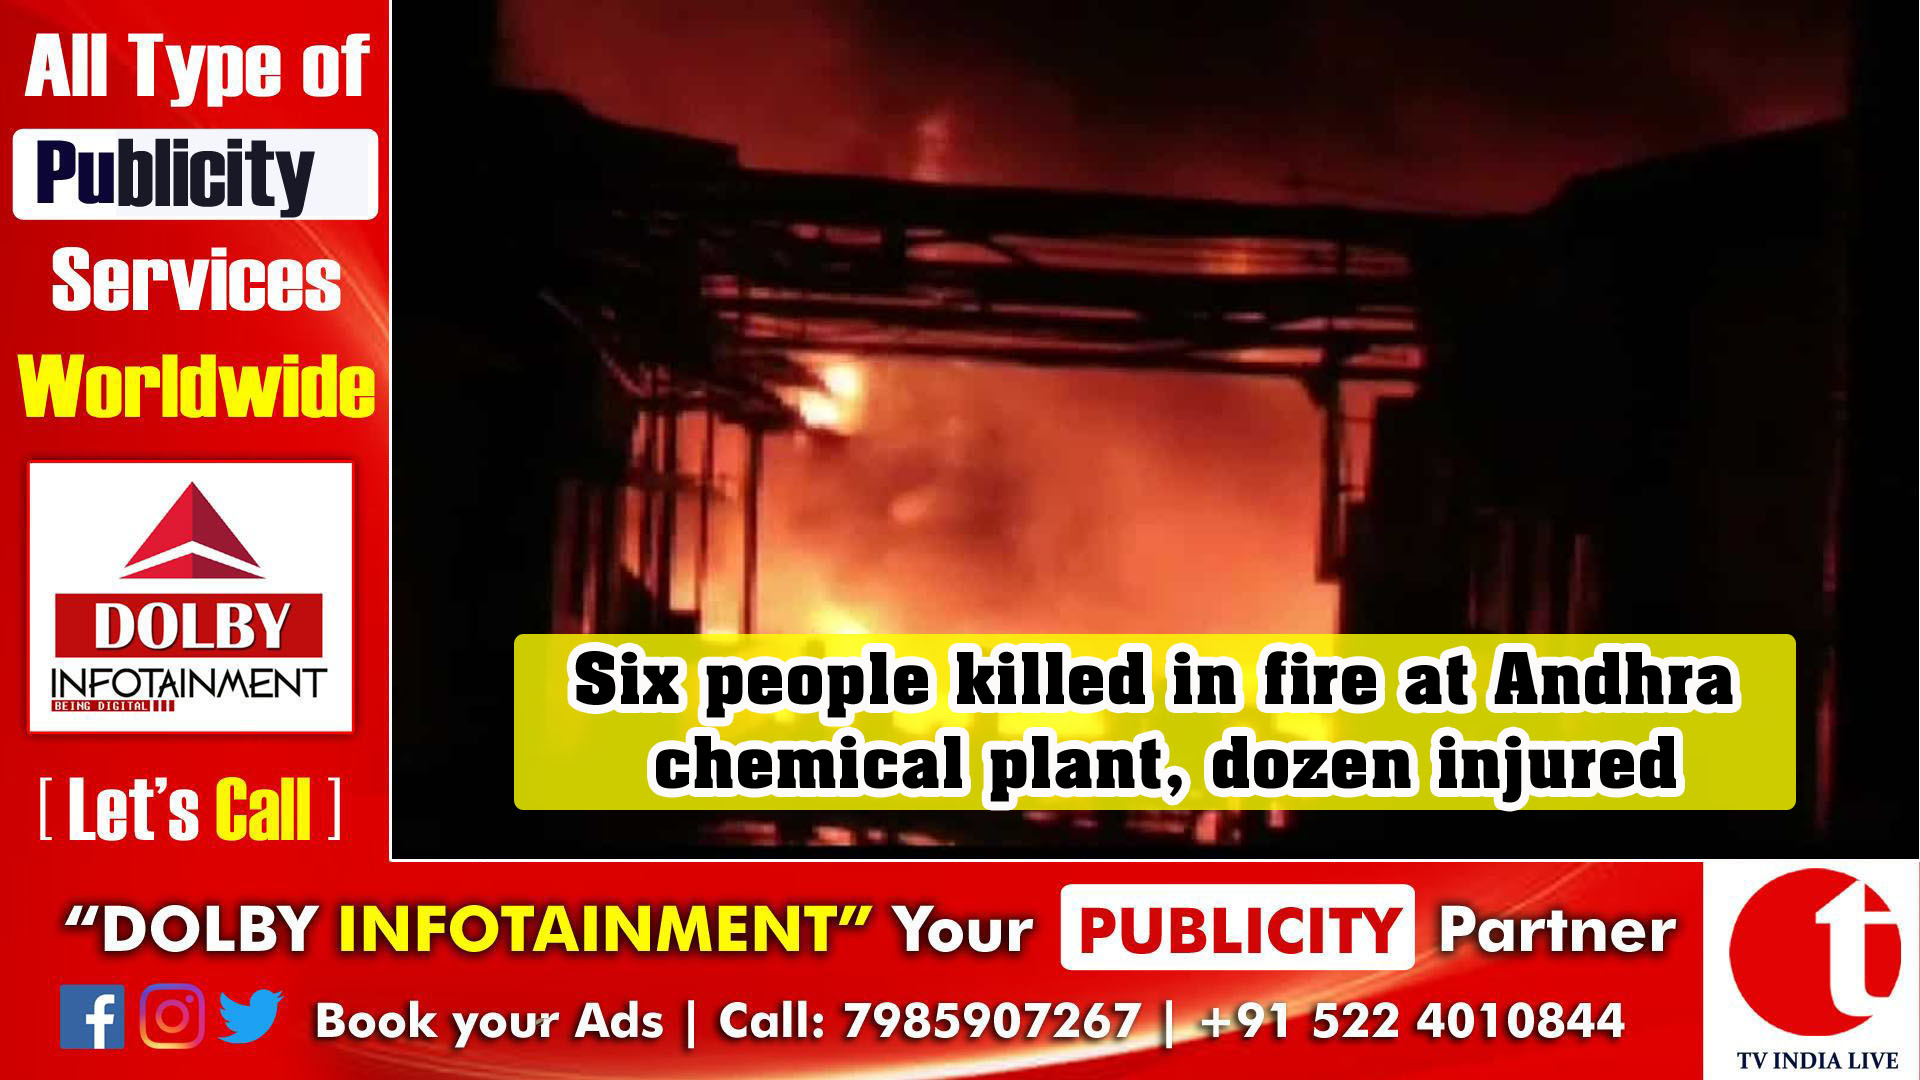 Six people killed in fire at Andhra chemical plant, dozen injured